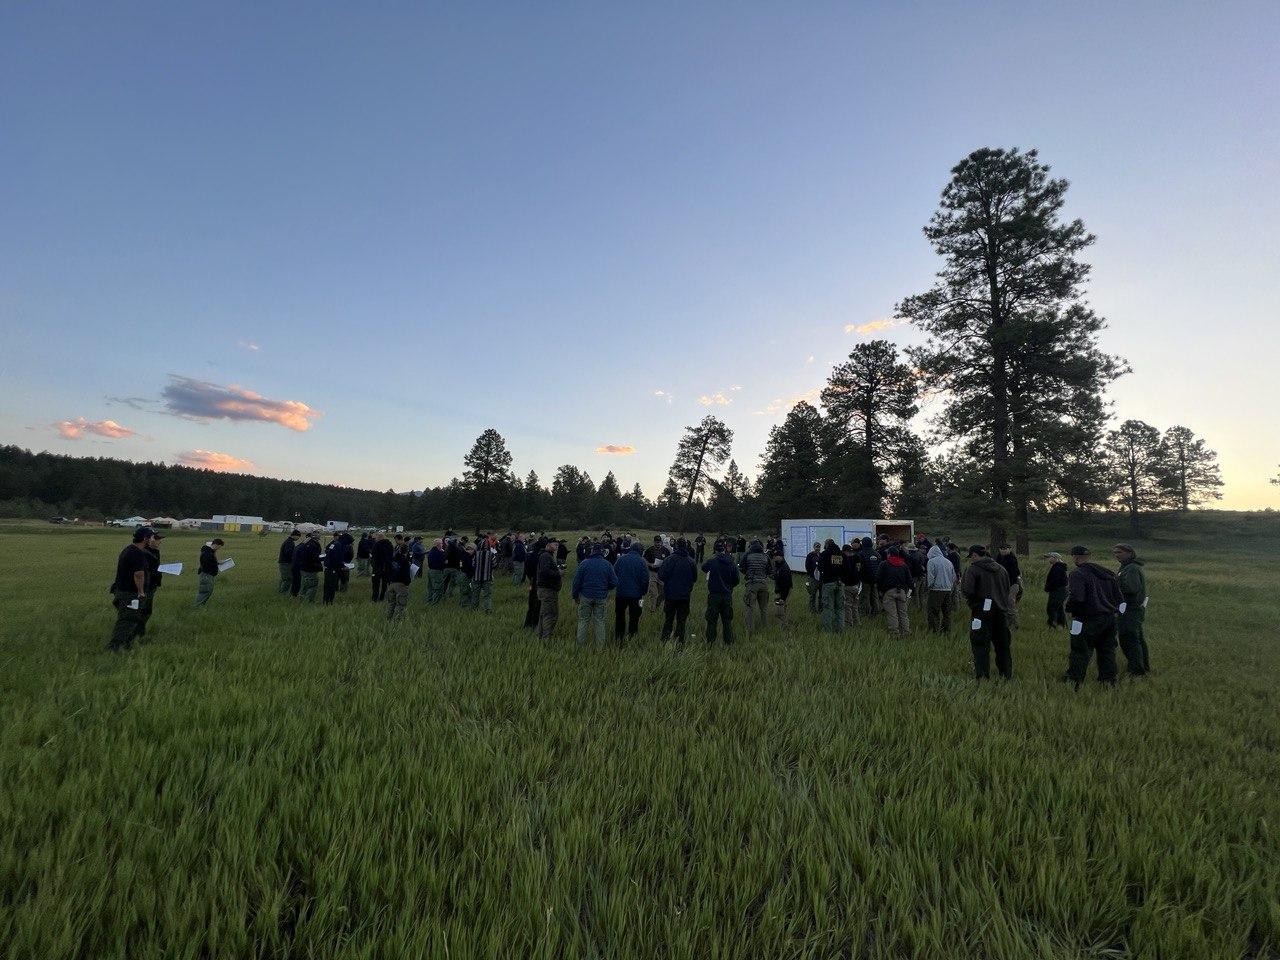 large group of people standing in green grass field as the sun rises in a mostly clear blue sky. People are surrounding a trailer with a map tape on the side to get a morning briefing